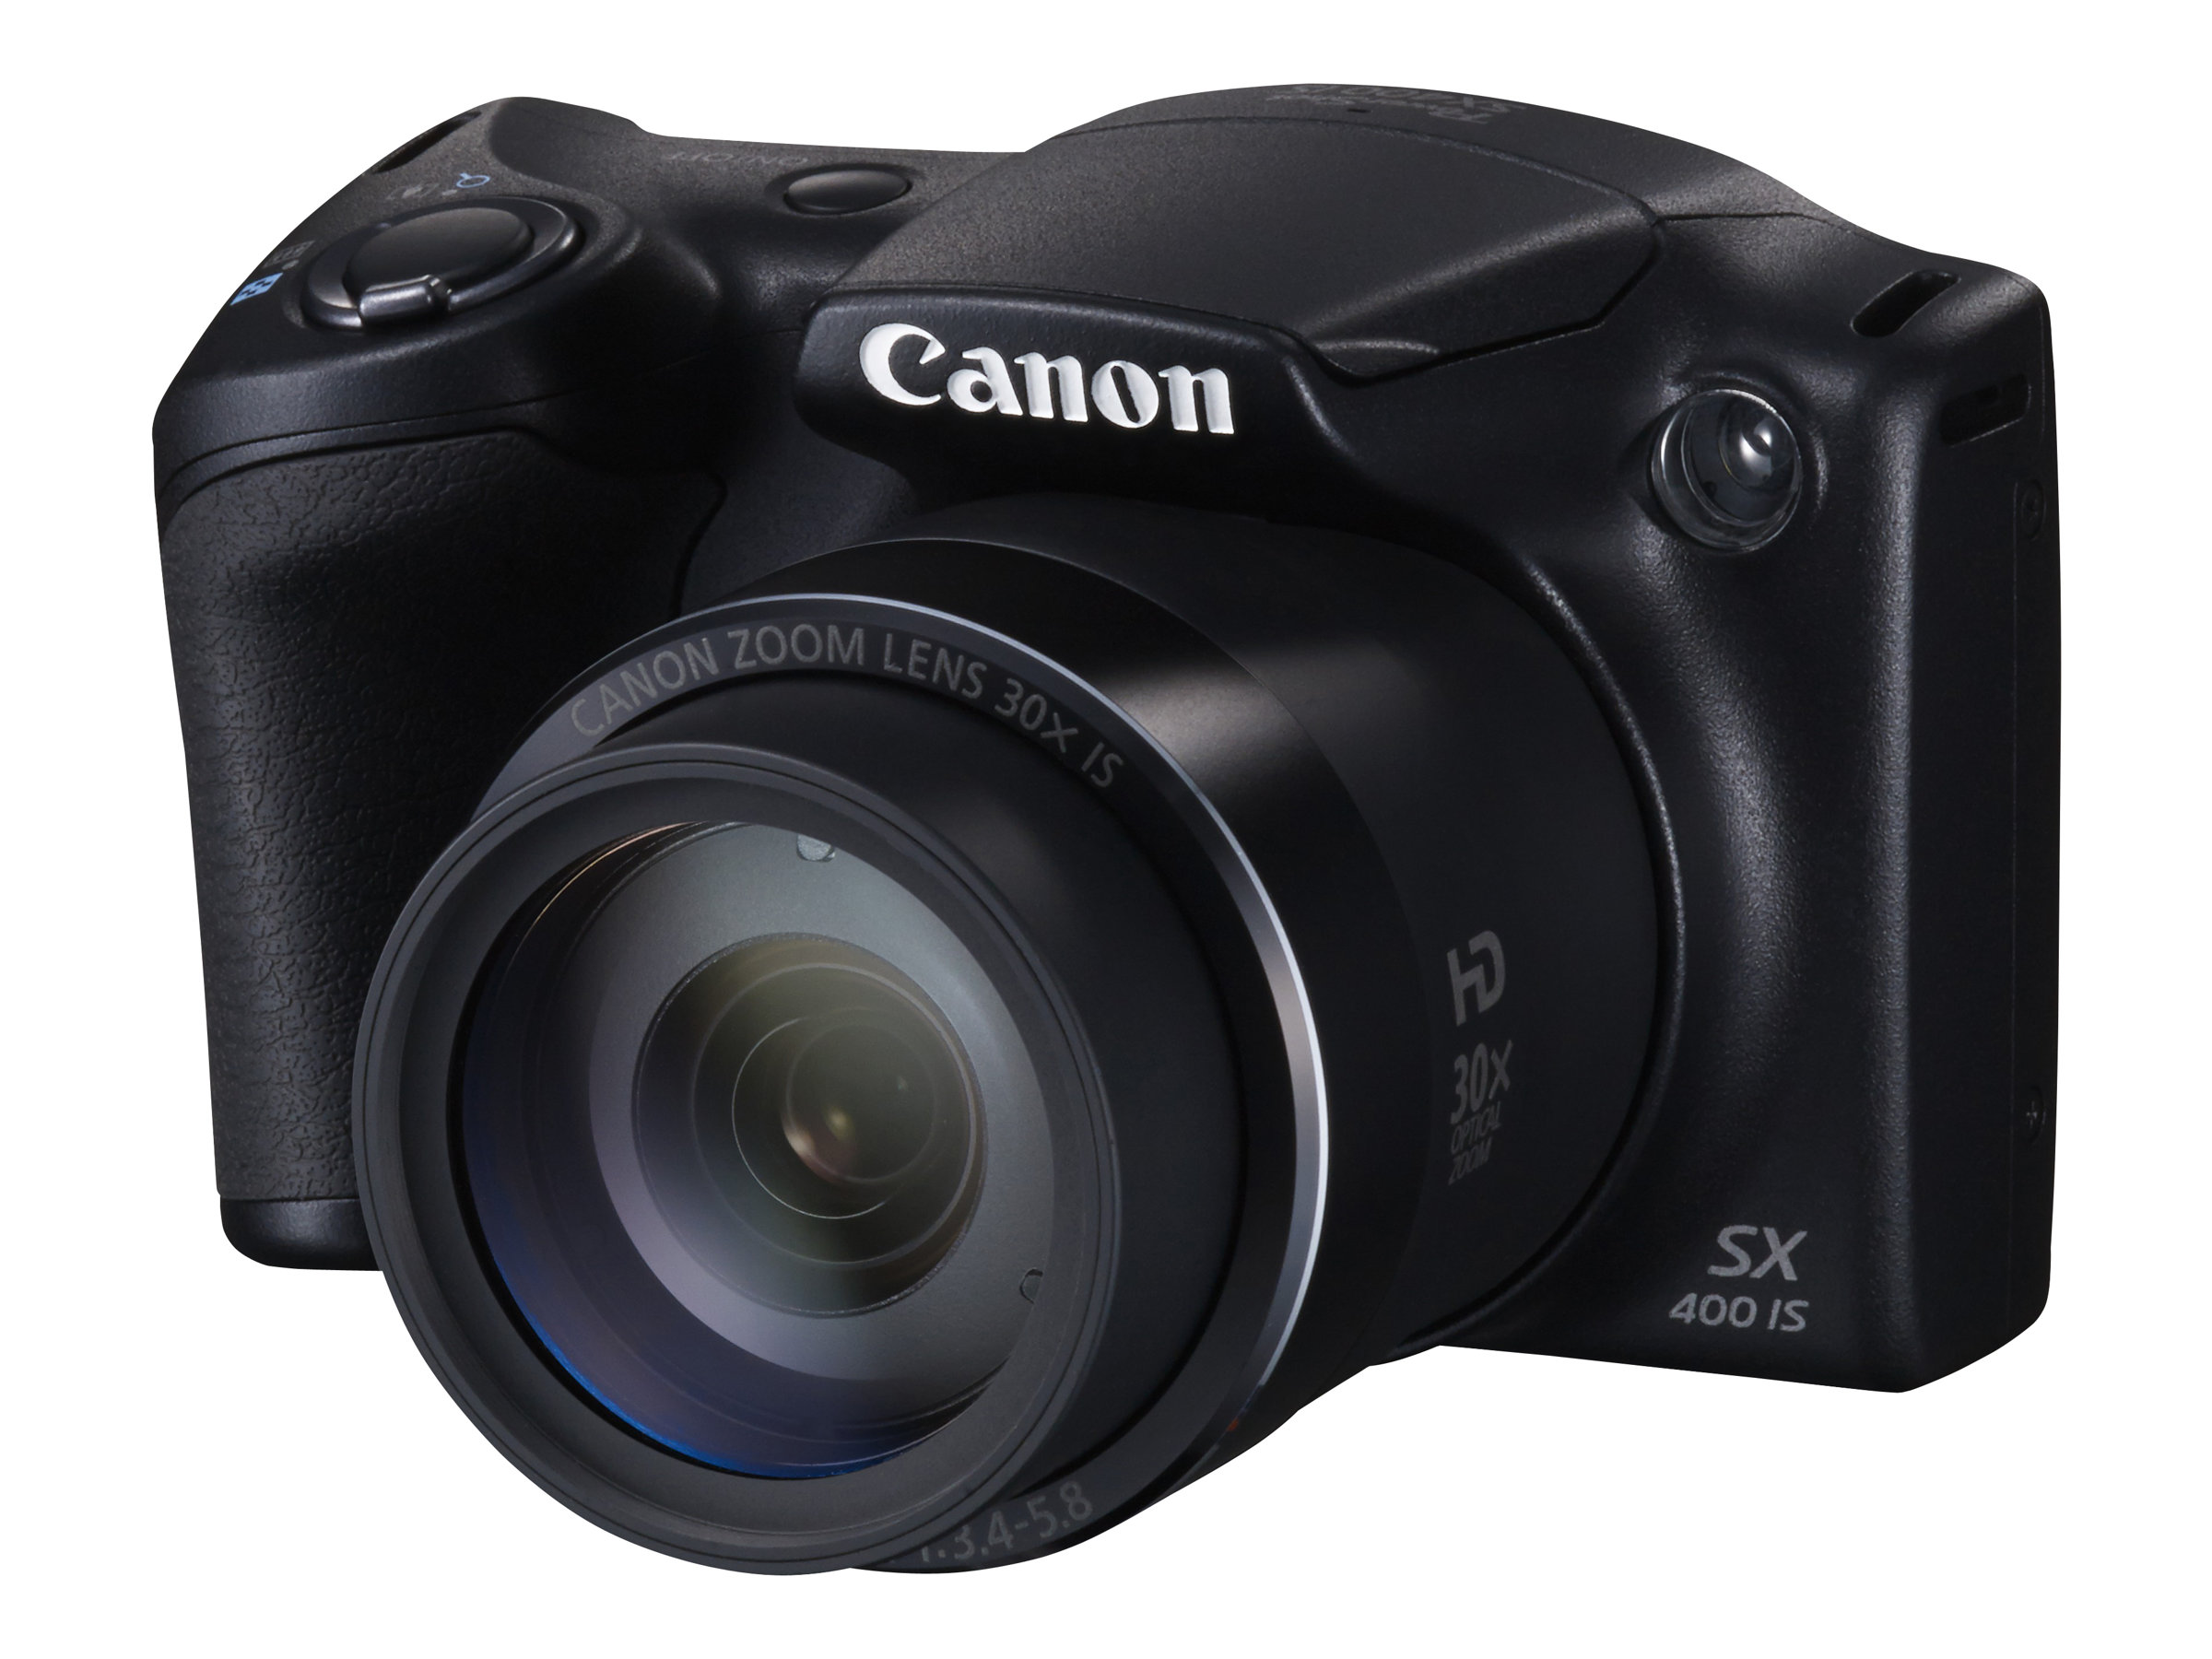 Canon PowerShot SX400 IS - Digital camera - compact - 16.0 MP - 720p - 30x optical zoom - black - image 2 of 9